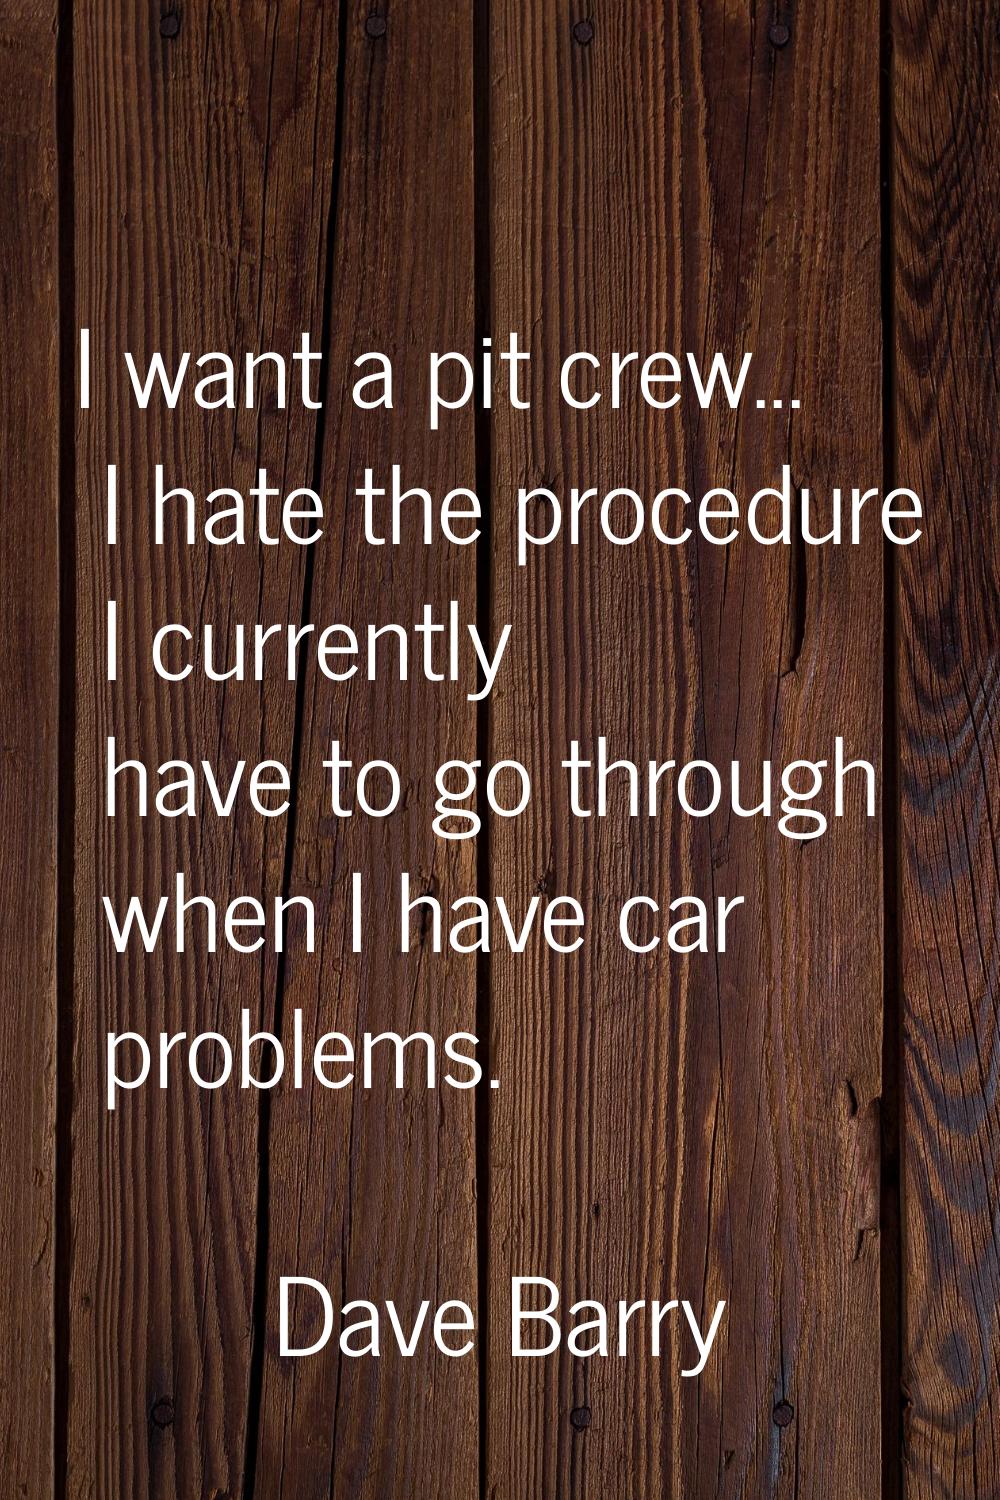 I want a pit crew... I hate the procedure I currently have to go through when I have car problems.